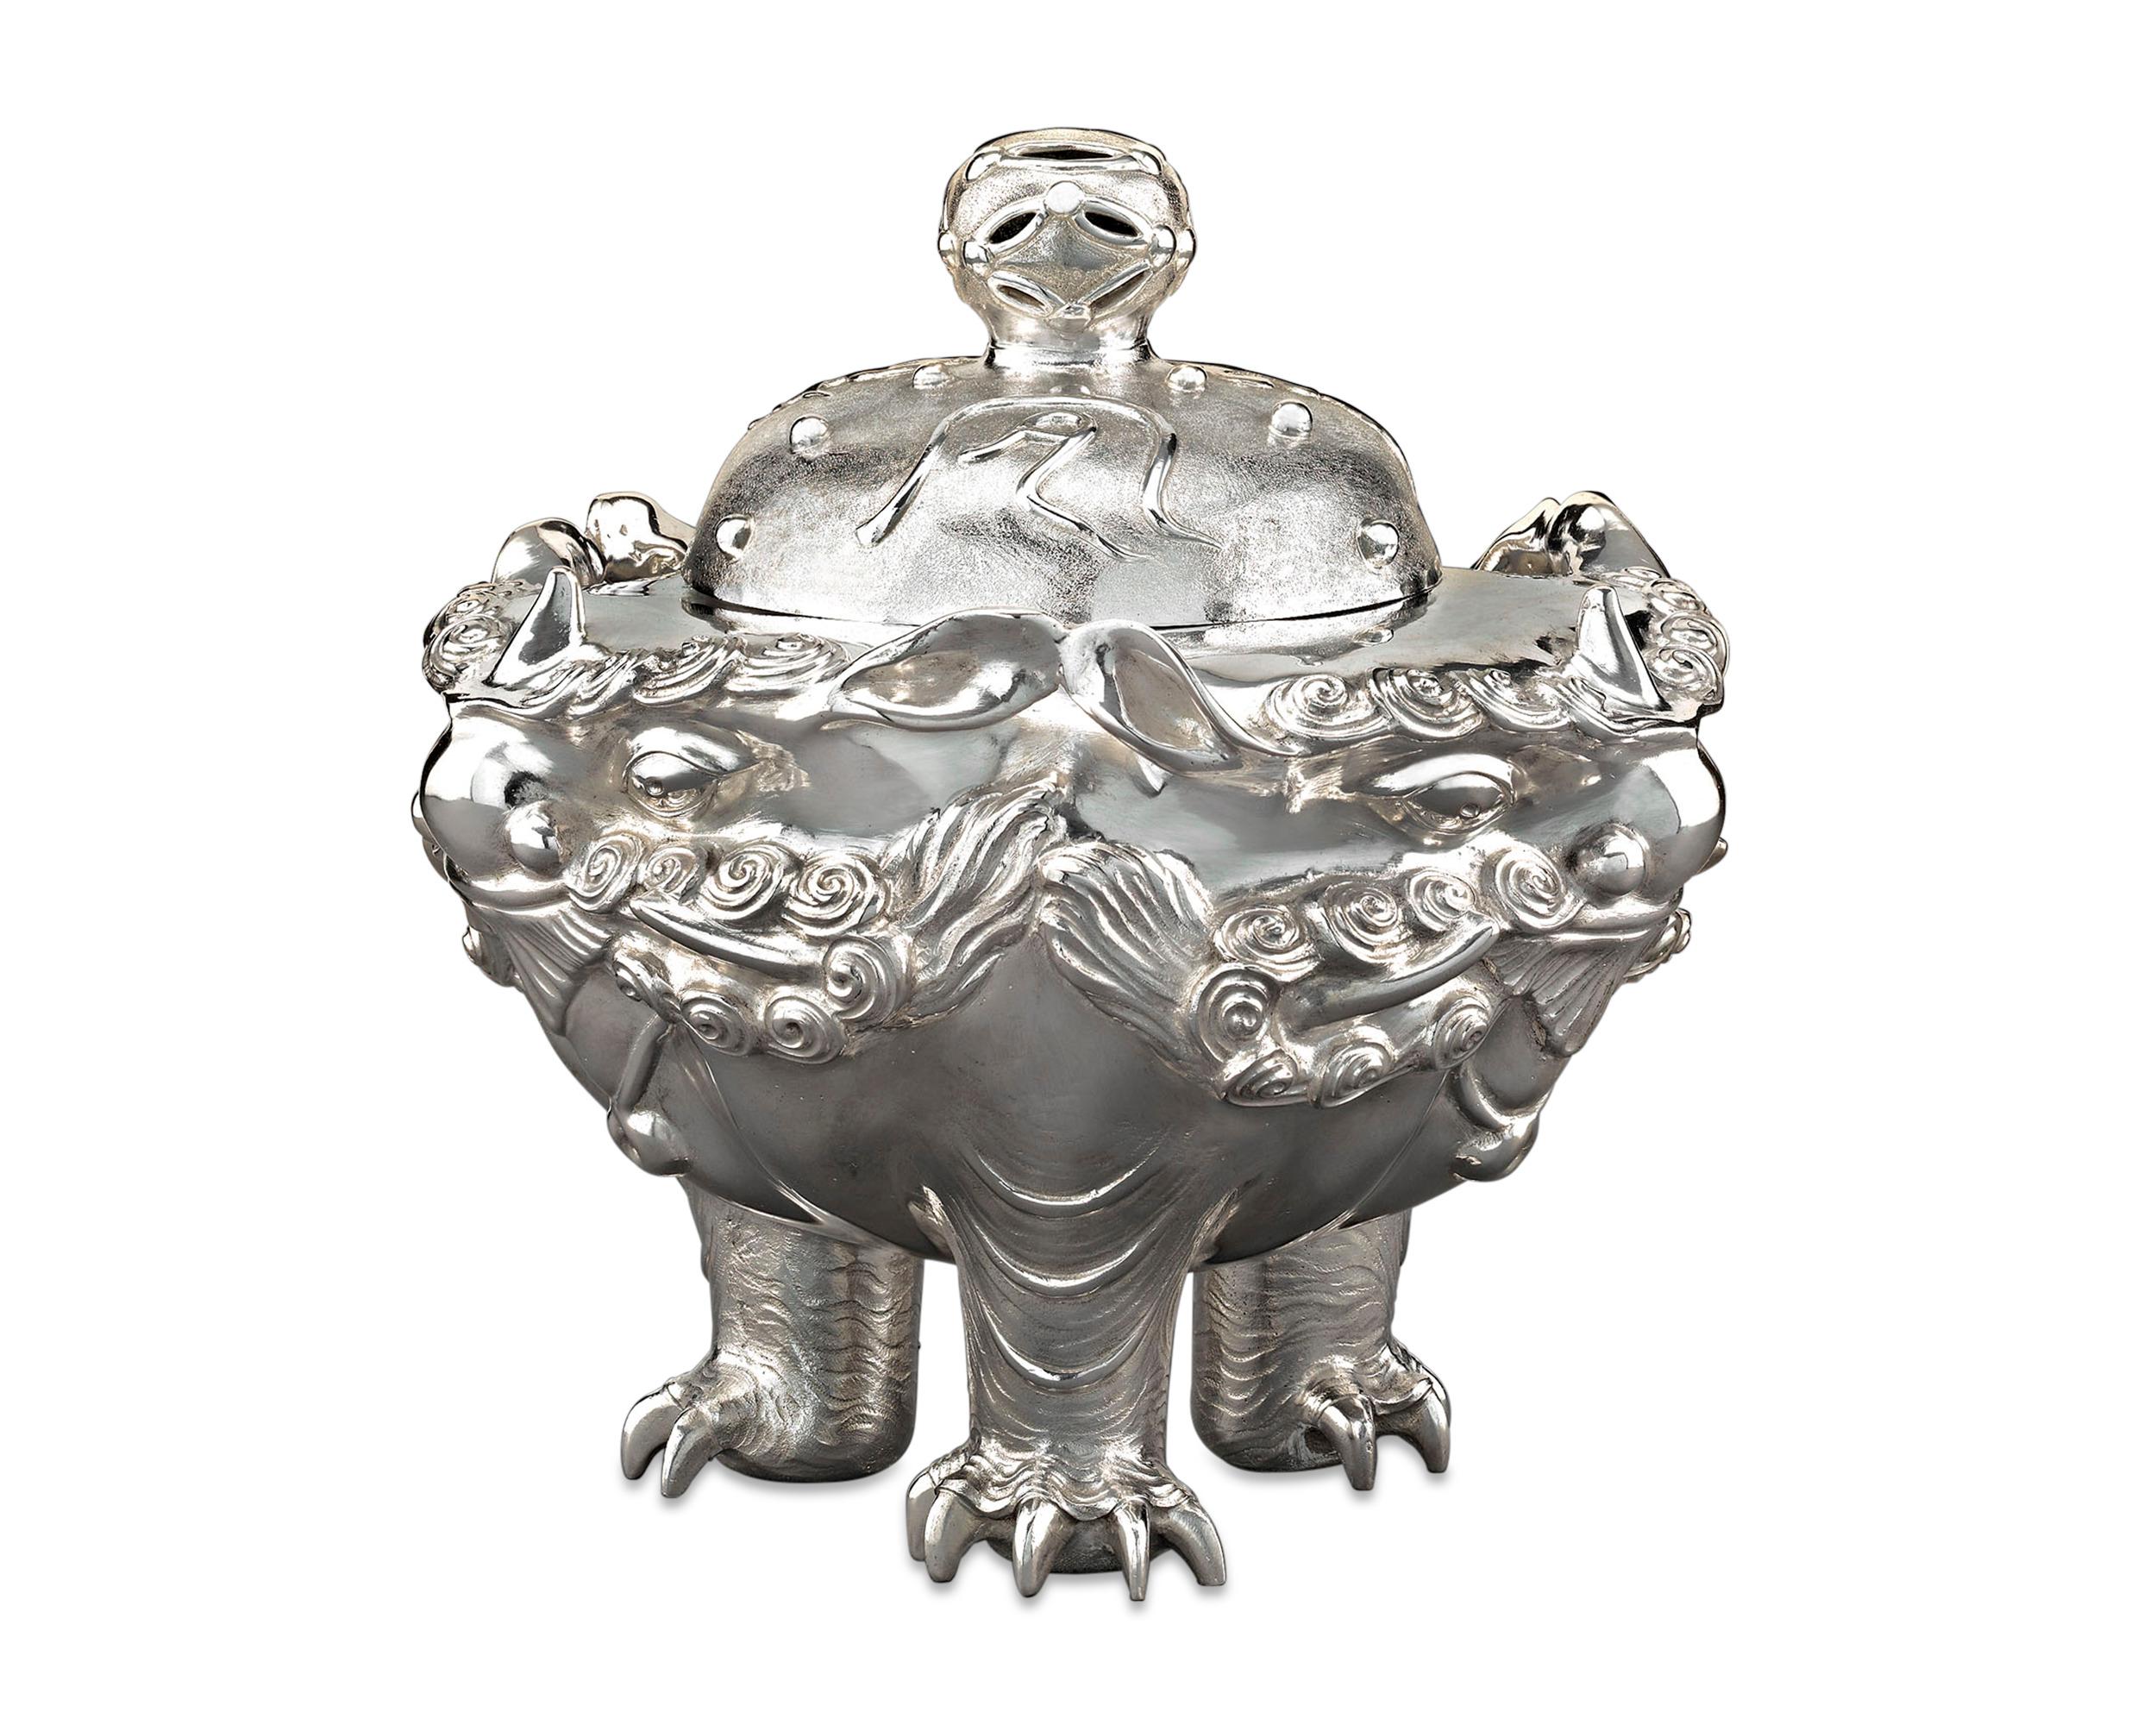 This stunning Meiji period silver censer is a work of exquisite detail. Crafted by renowned silversmith Masatoshi of Tokyo, the censer, or incense burner, is raised on three masterfully formed claw feet, which extend upwards and culminate in three